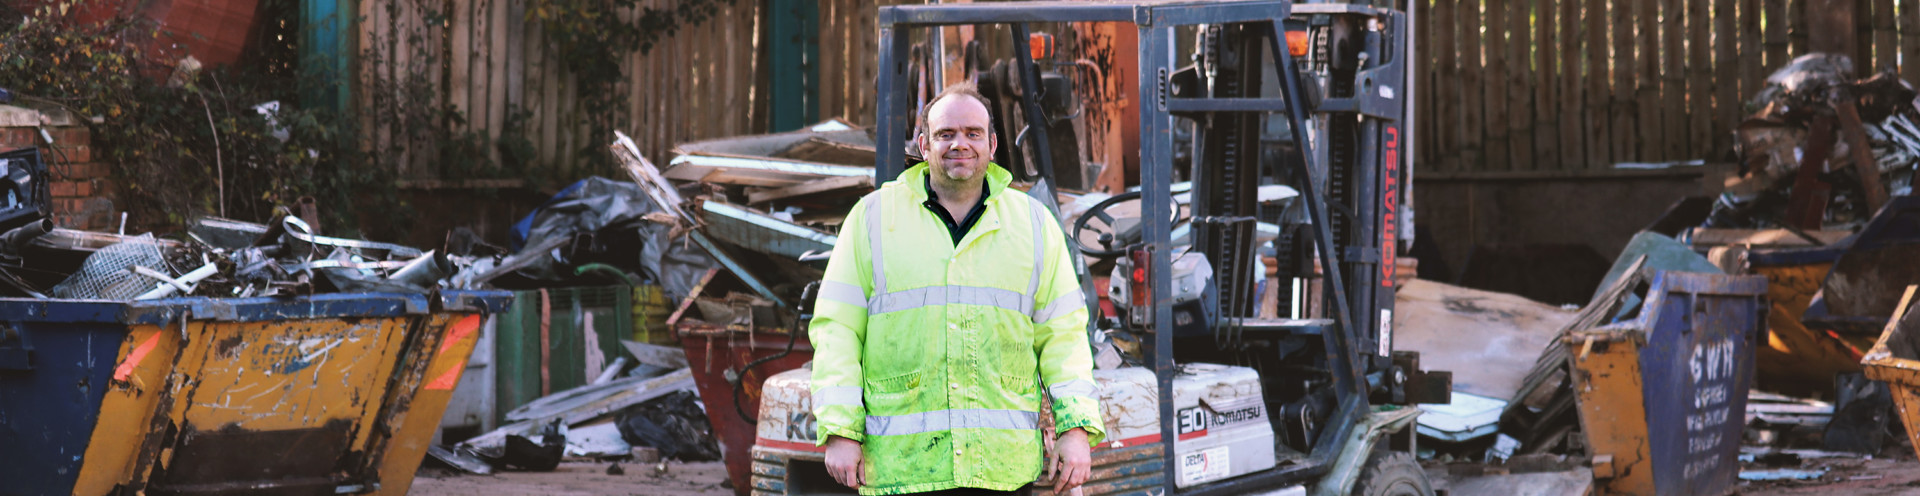 George next to a forklift in the Waste Management Centre